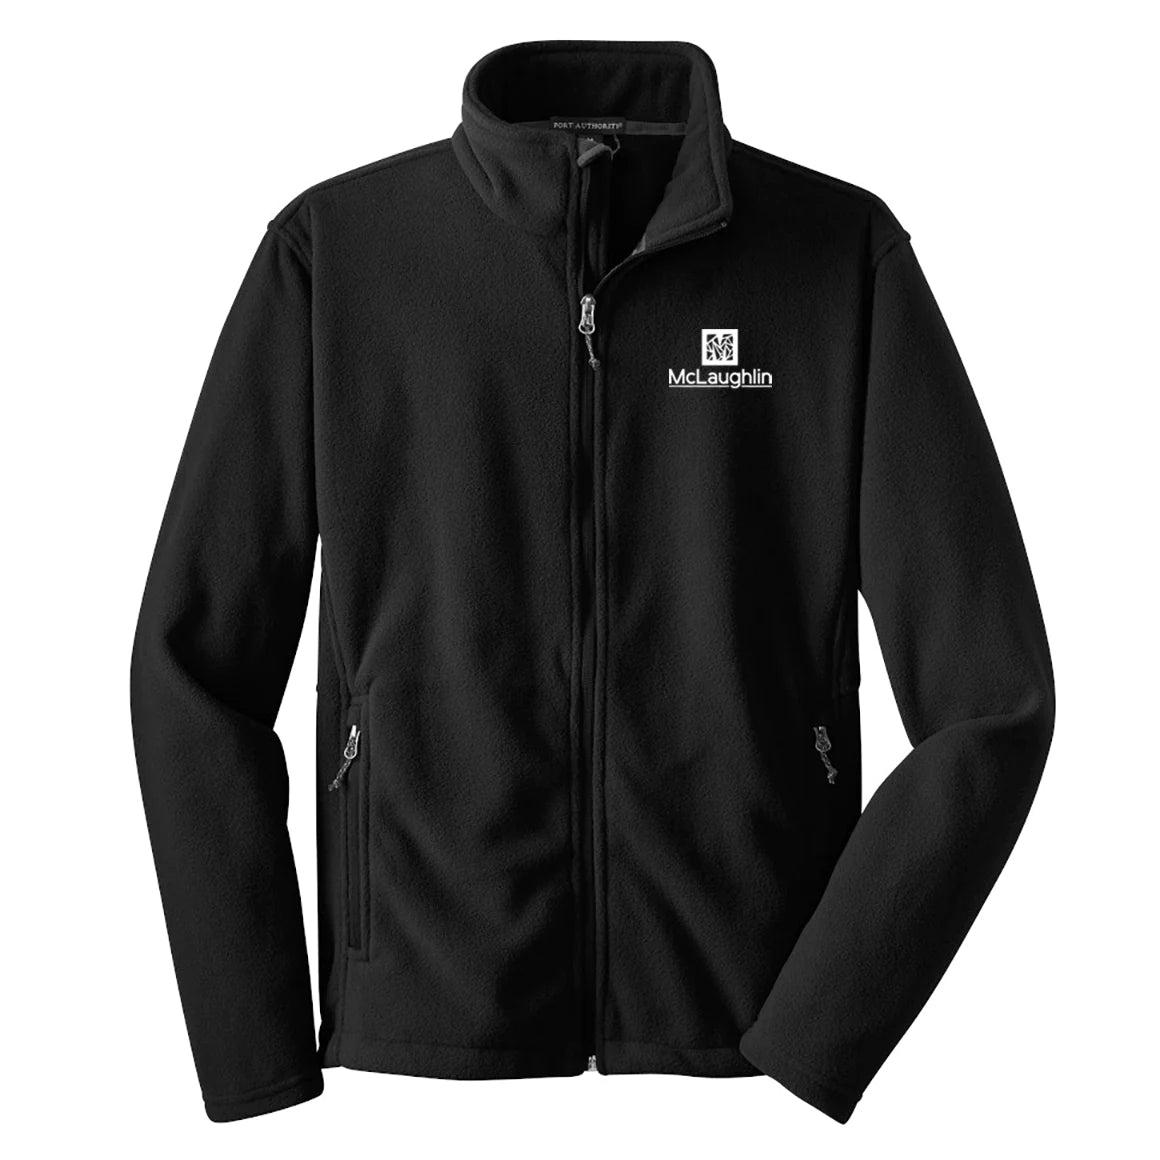 Clearance - Approved for Uniform Wear - McLaughlin Youth & Adult Port Authority® Value Fleece Jacket